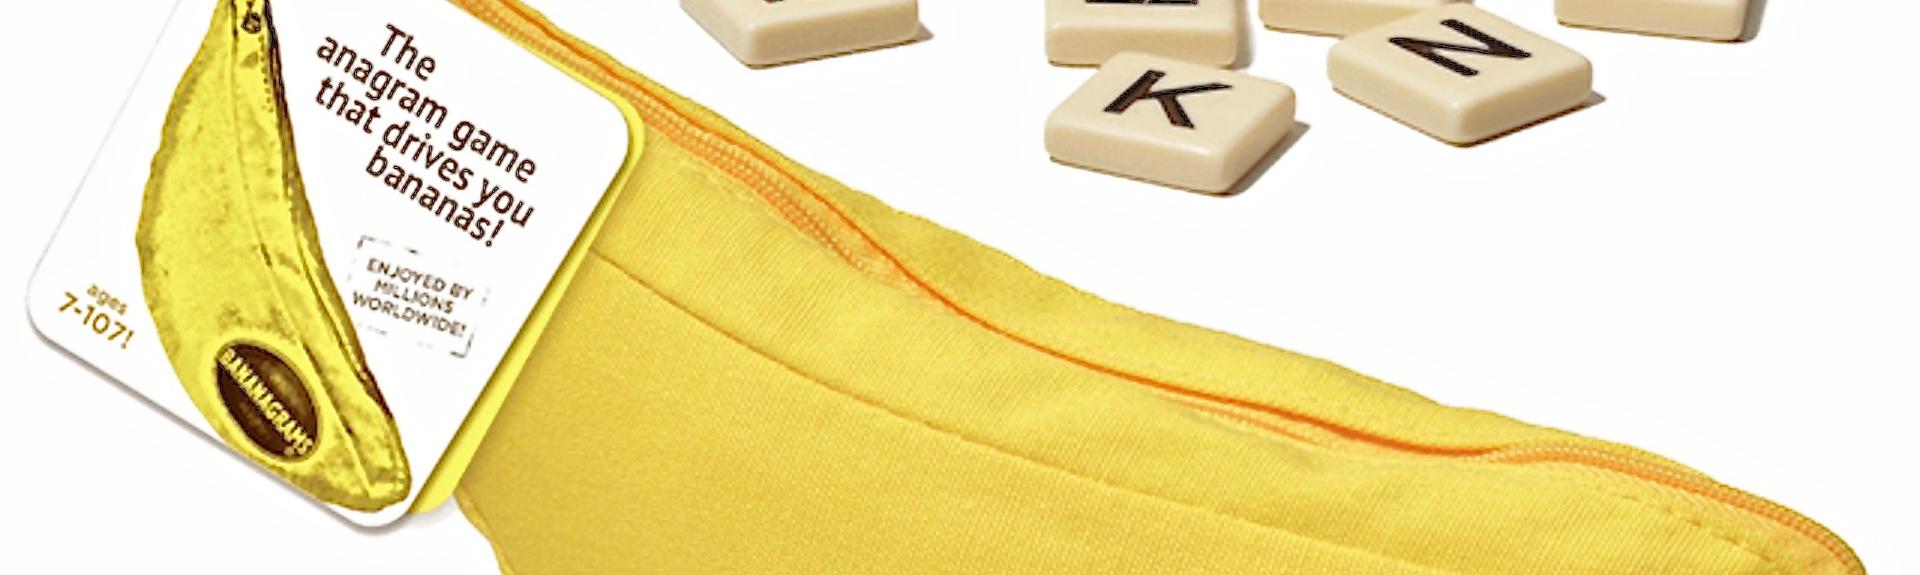 Image of the box cover for Banannagame, in the shape of a zip-up banana, with some   little plastic squares each containing a letter.